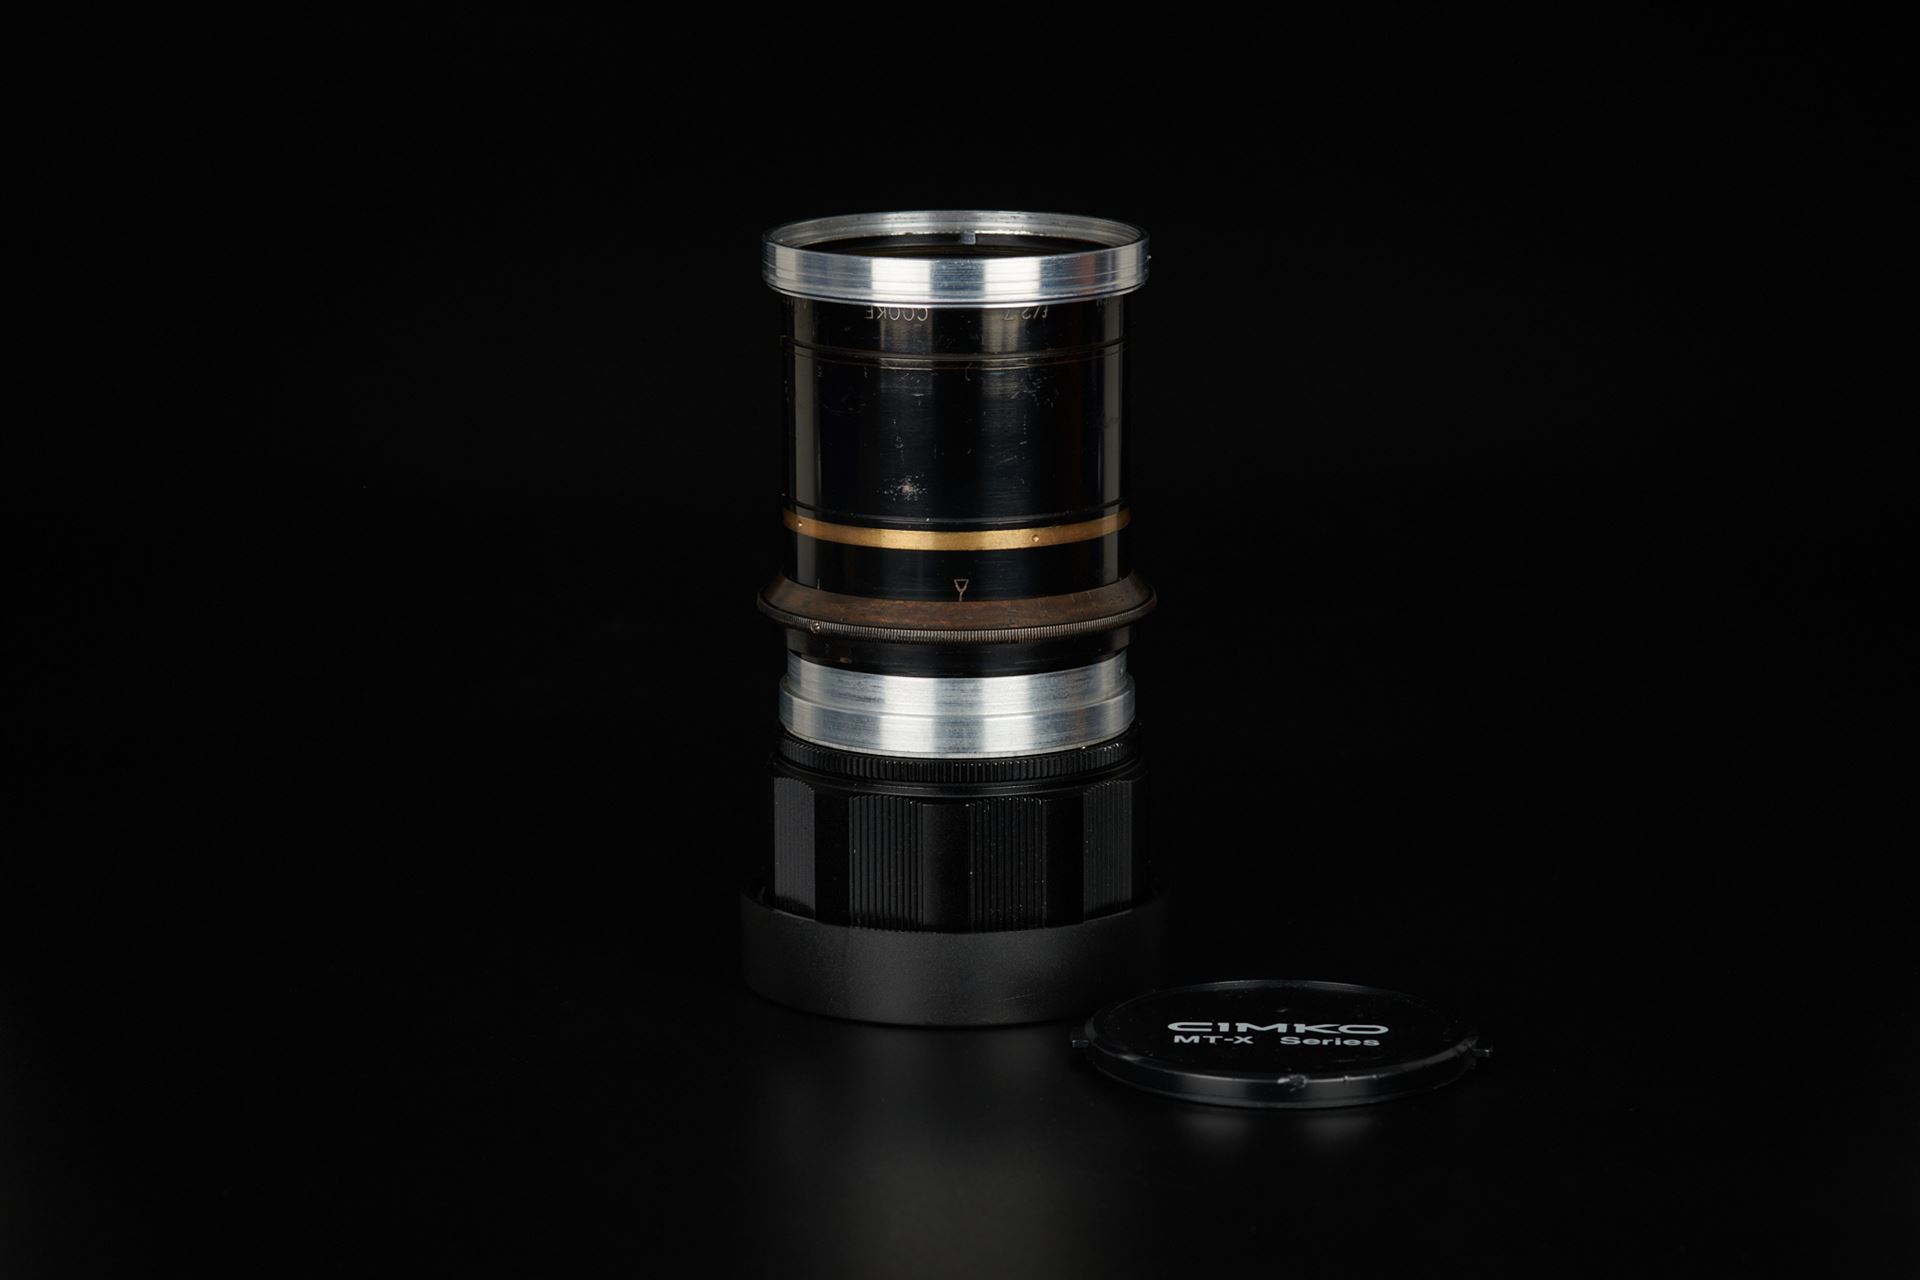 Picture of cooke technicolor 6inch f/2.7 modified to hasselblad v